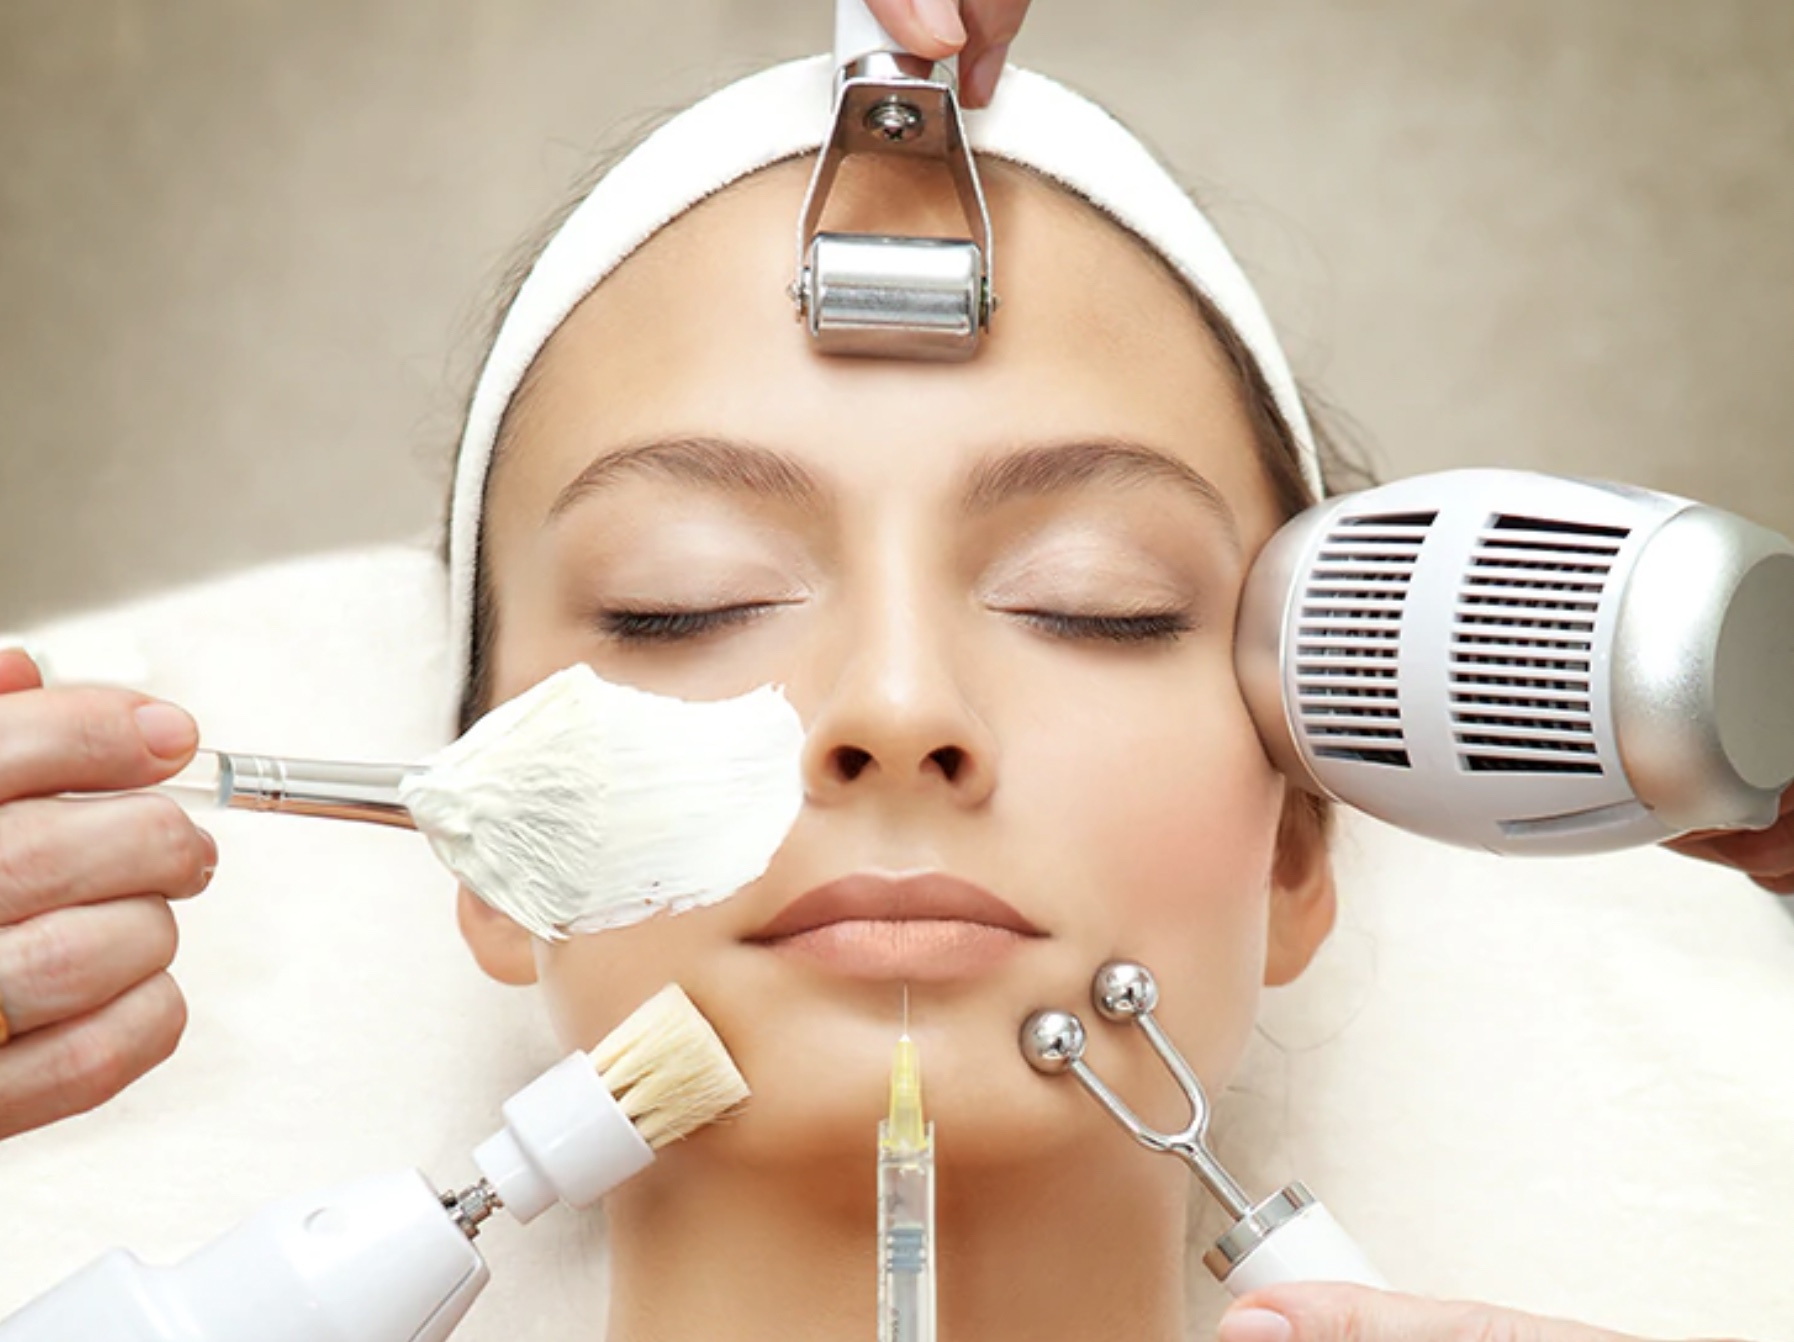 Microneedling vs Microdermabrasion What's the Difference